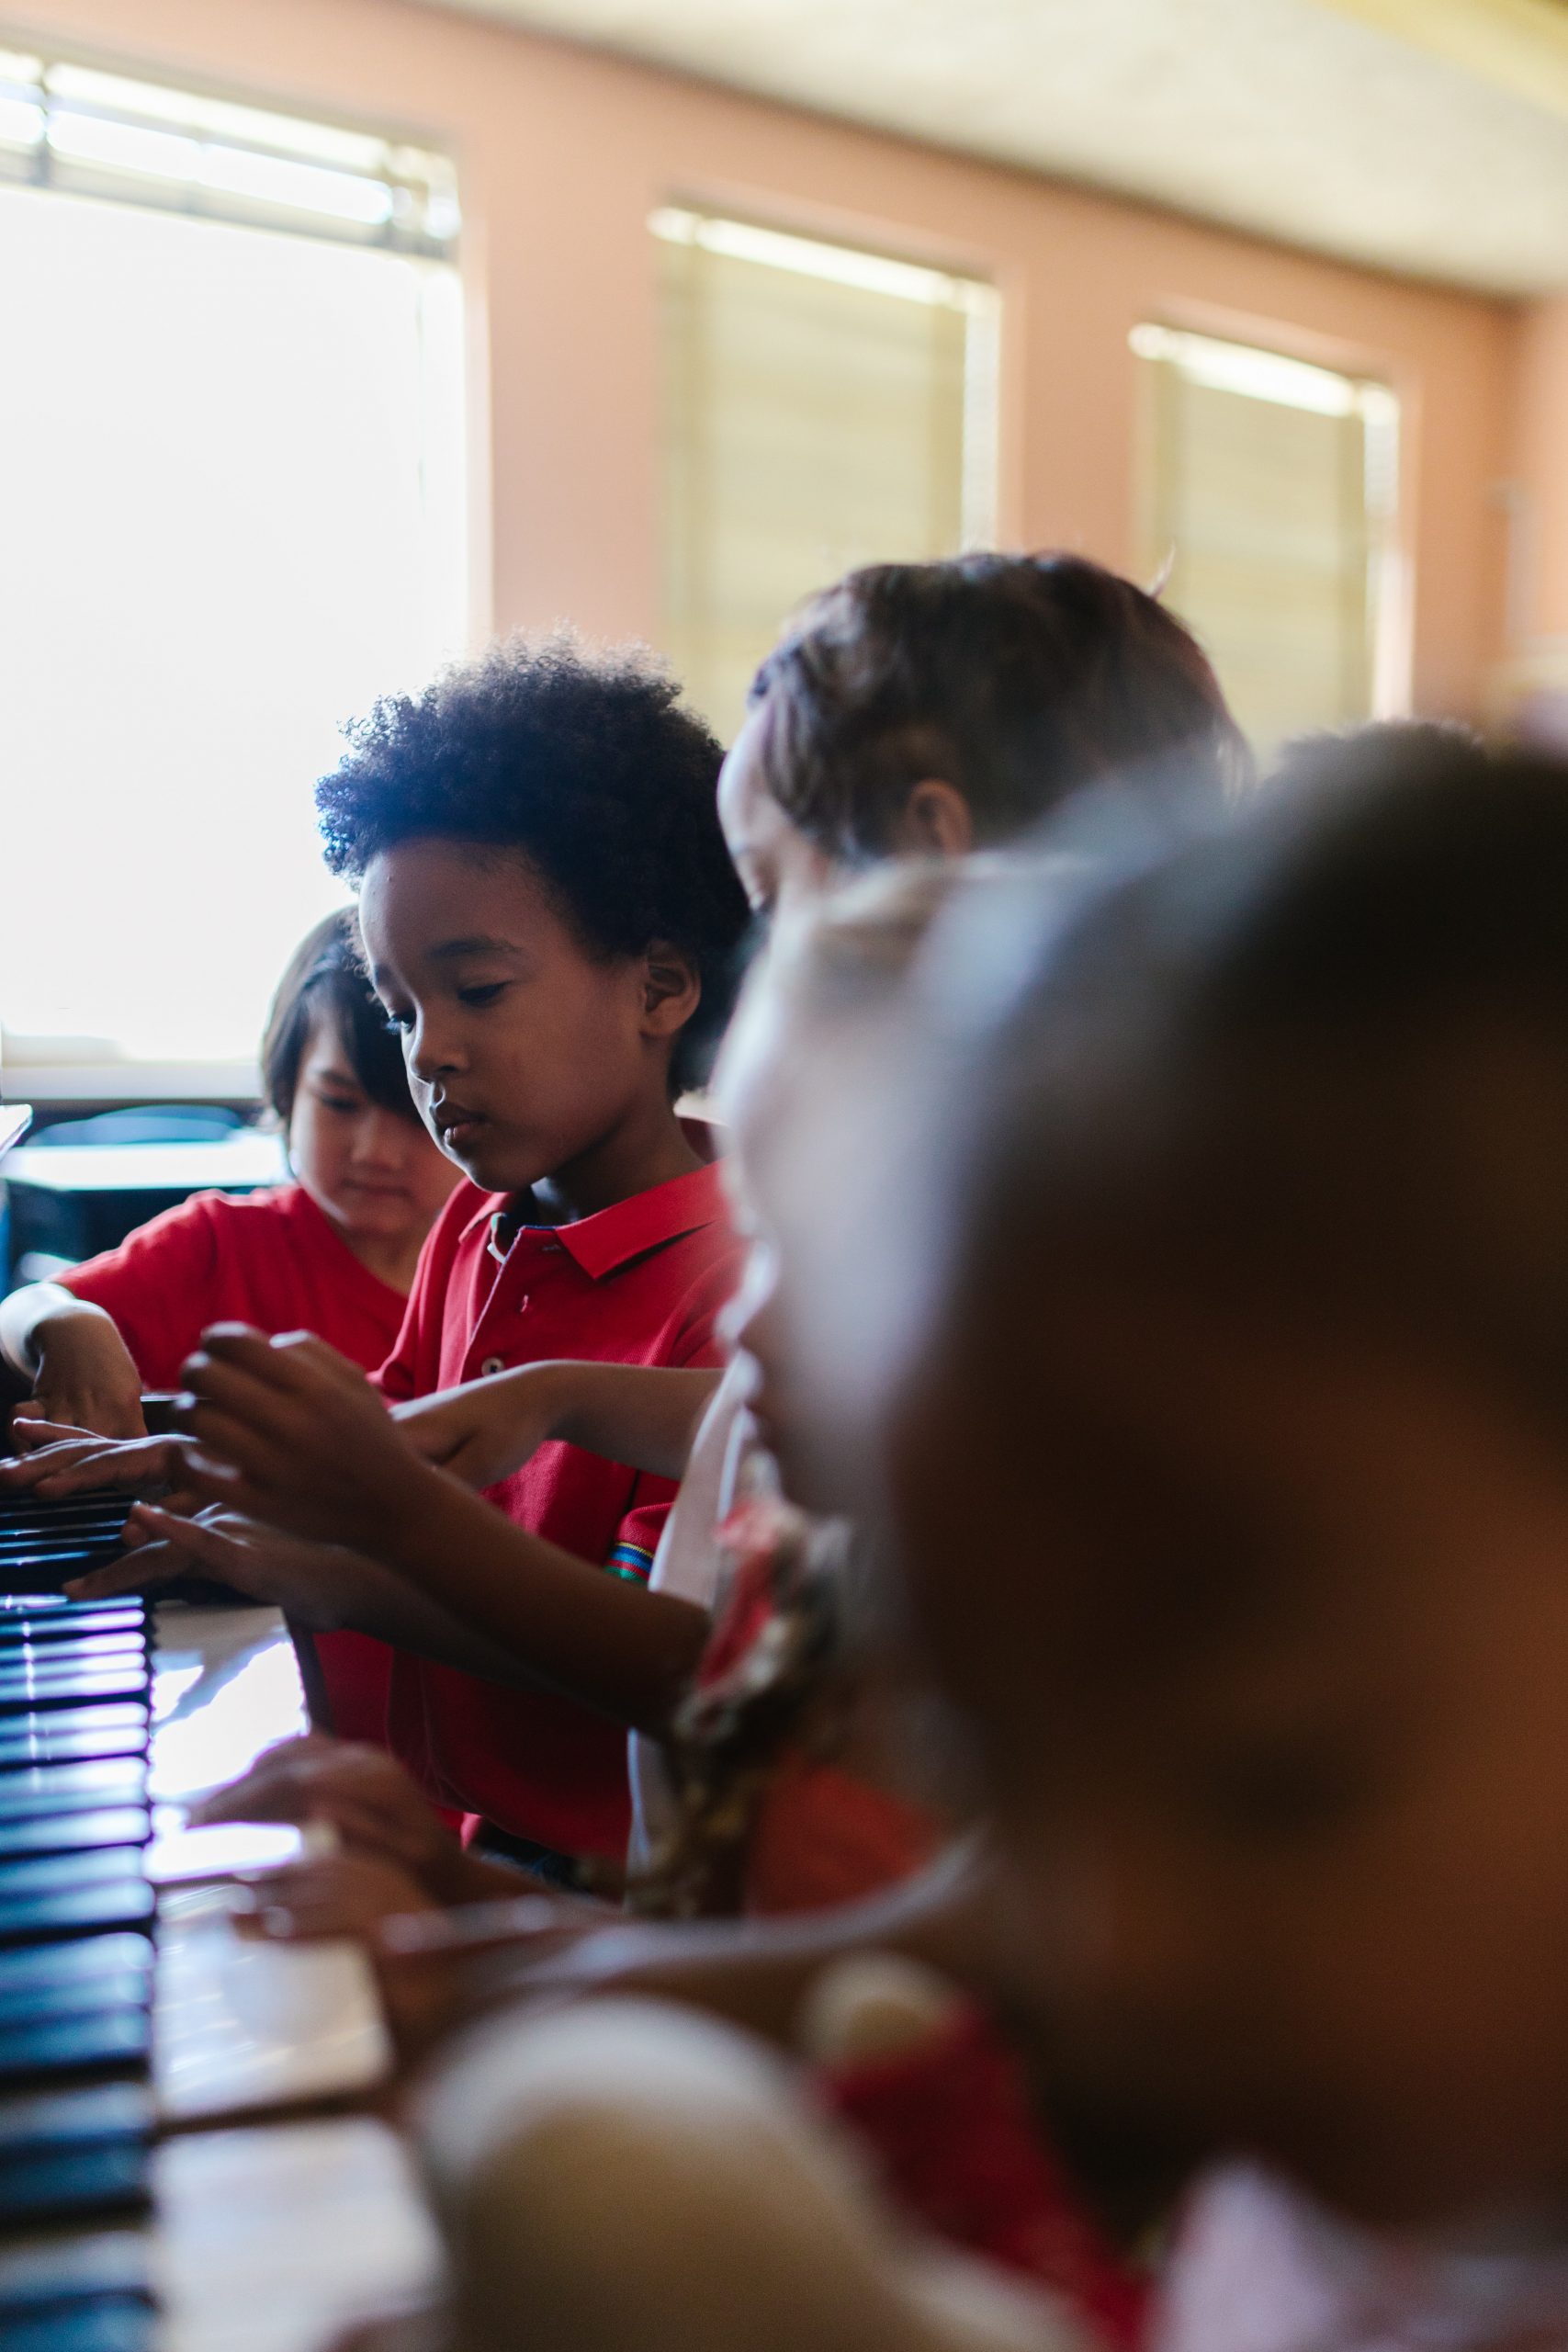 A focused child in a red shirt is playing a piano, surrounded by classmates in a sunlit classroom, capturing a moment of musical exploration and peer learning.